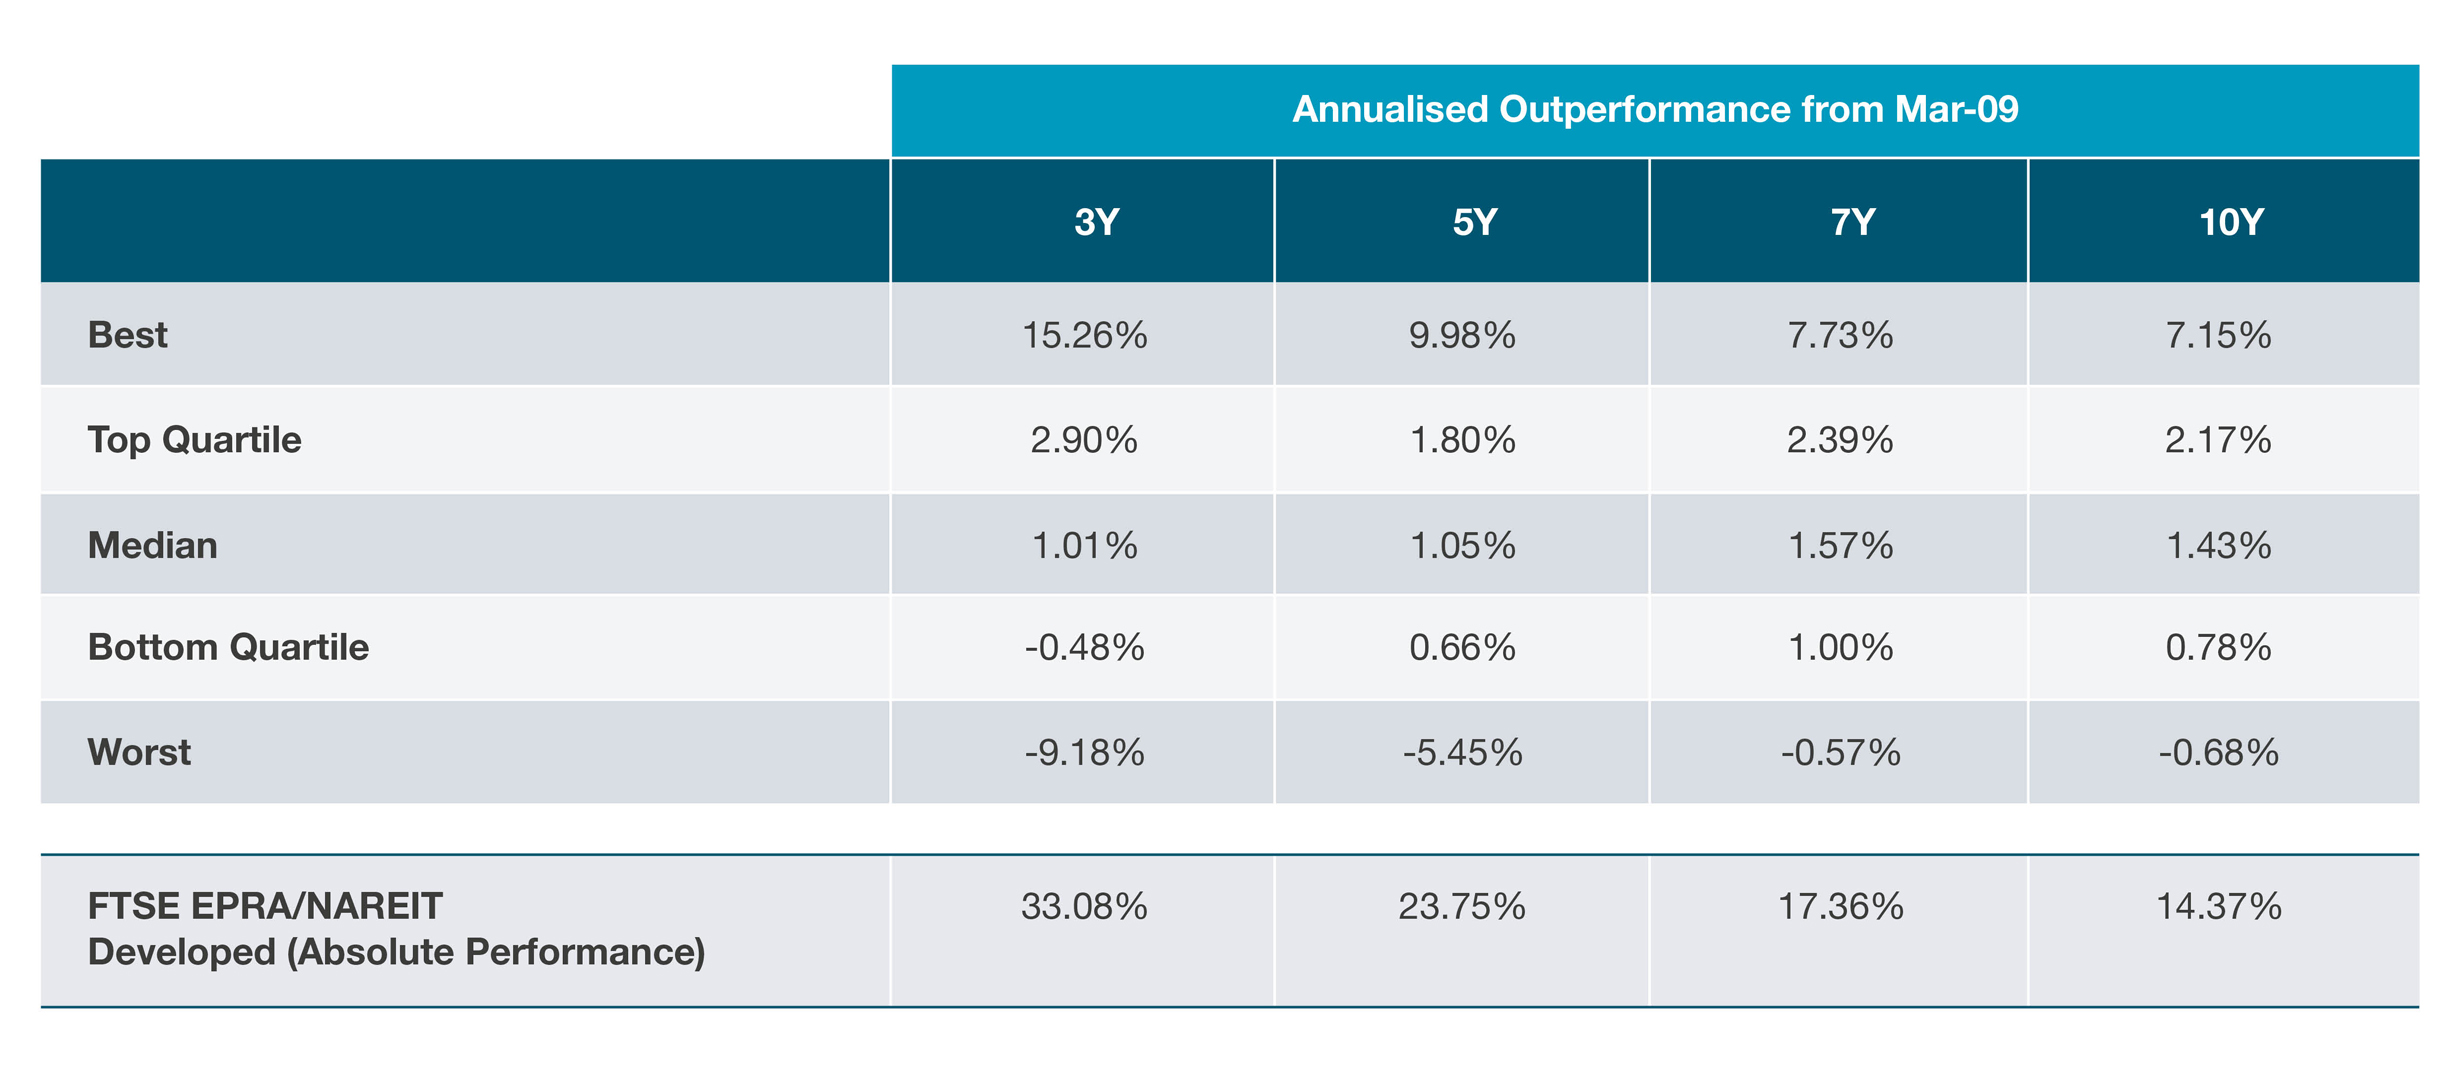 Annualised Outperformance